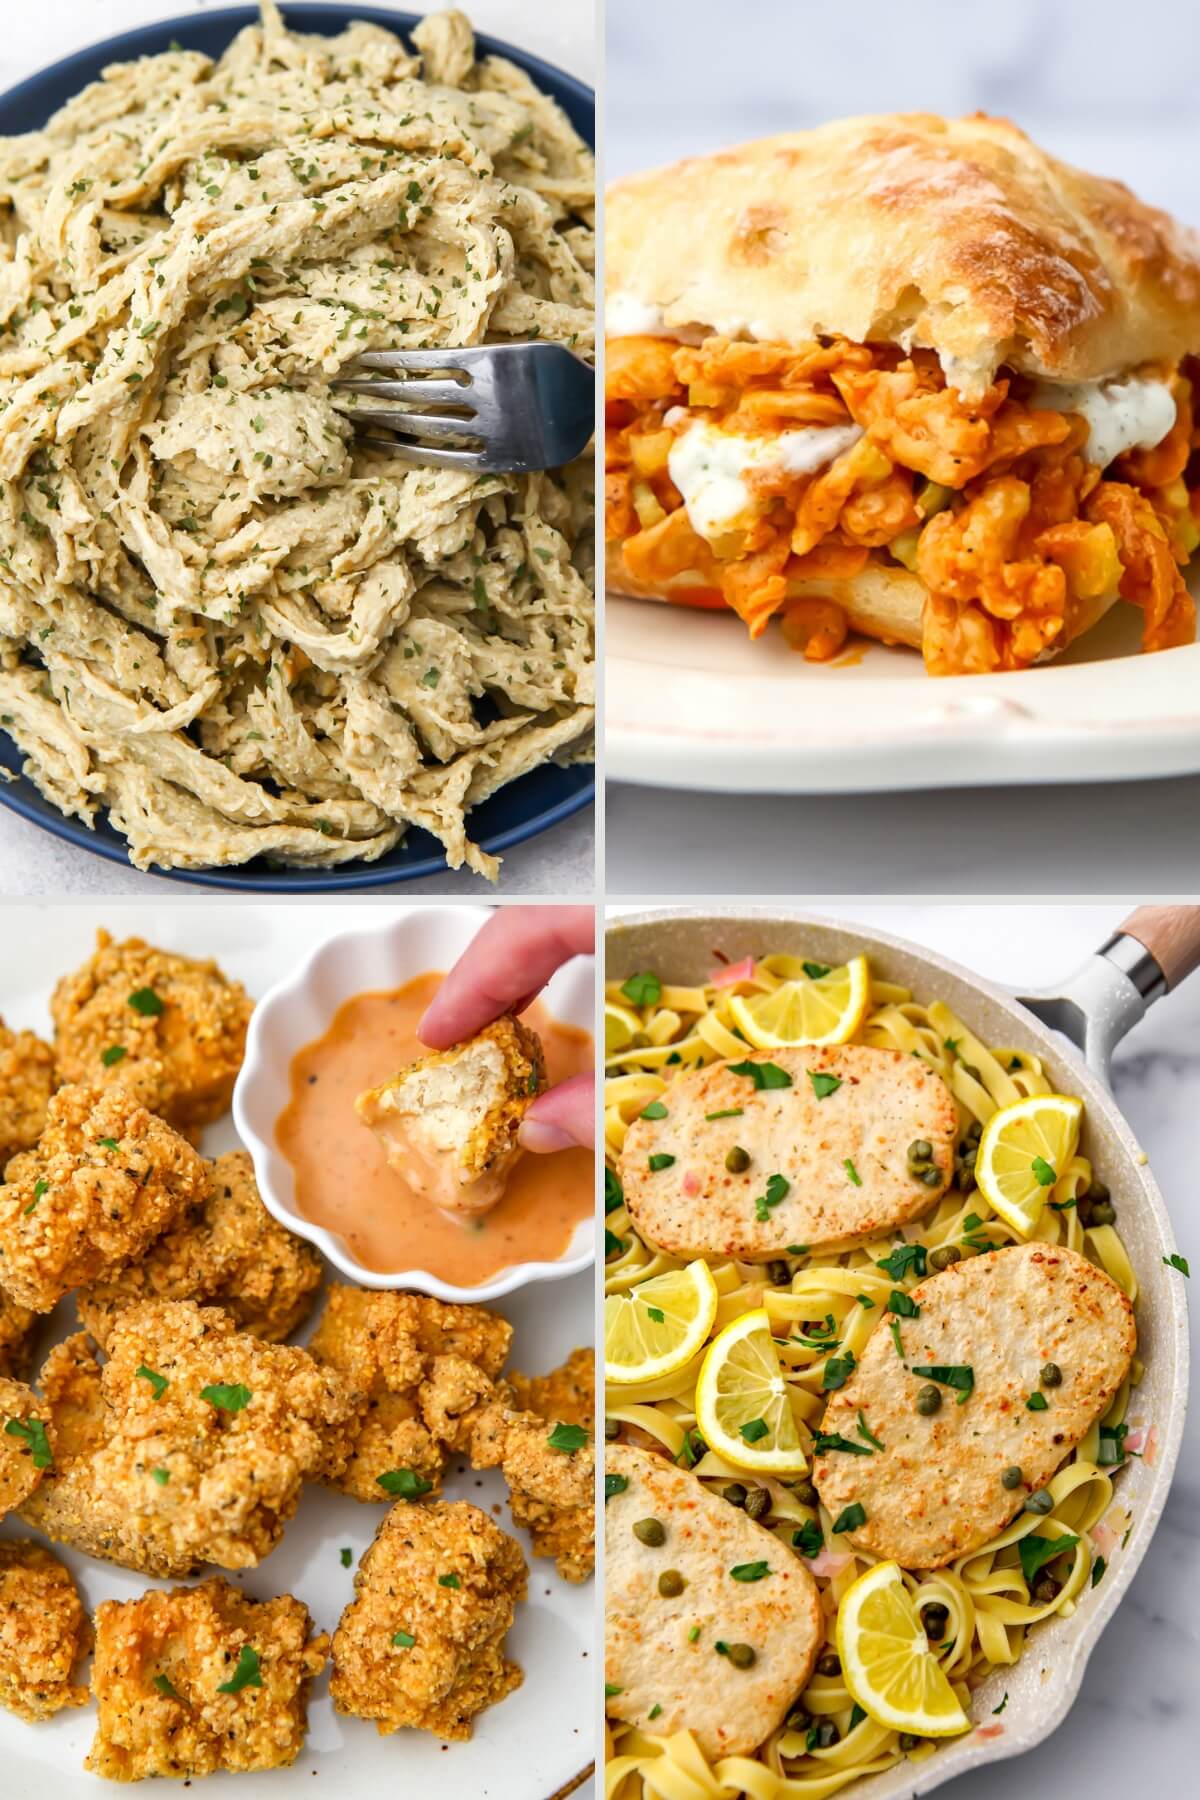 A collage of 4 images showing vegan chicken substitutes using seitan, tofu, Butler Soy Curls, and store bough vegan chicken.